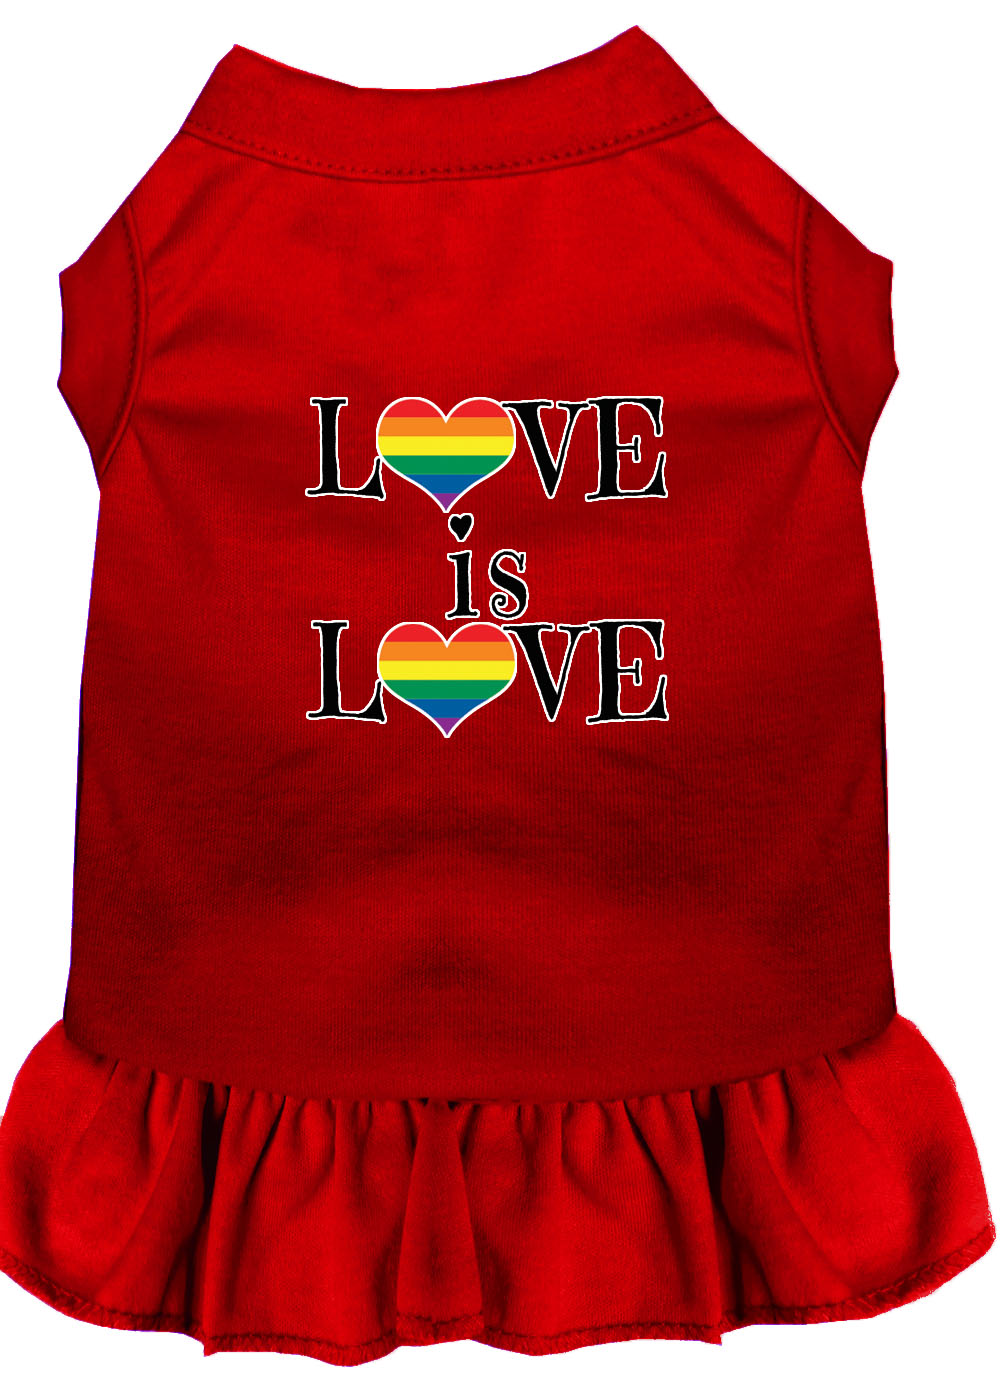 Love is Love Screen Print Dog Dress Red Med